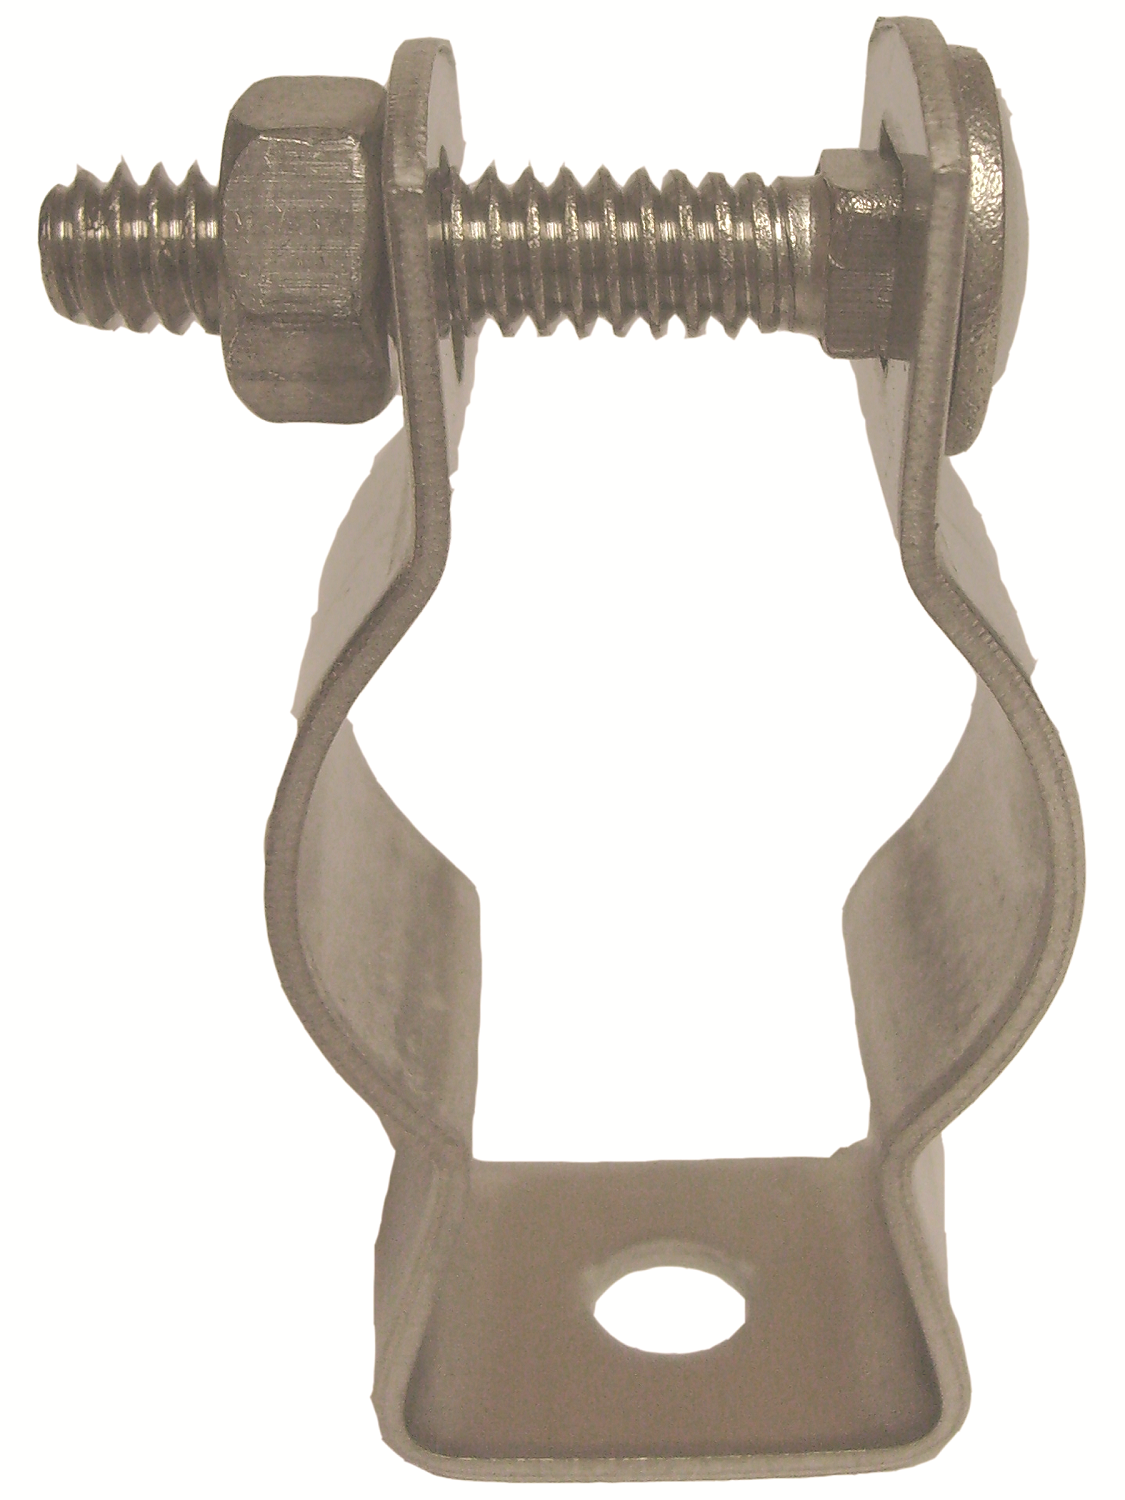 Allied Tube & Conduit HCS5KON Conduit Hanger With Nut and Bolt, 2 in Conduit, 100 lb Load, Carbon Steel